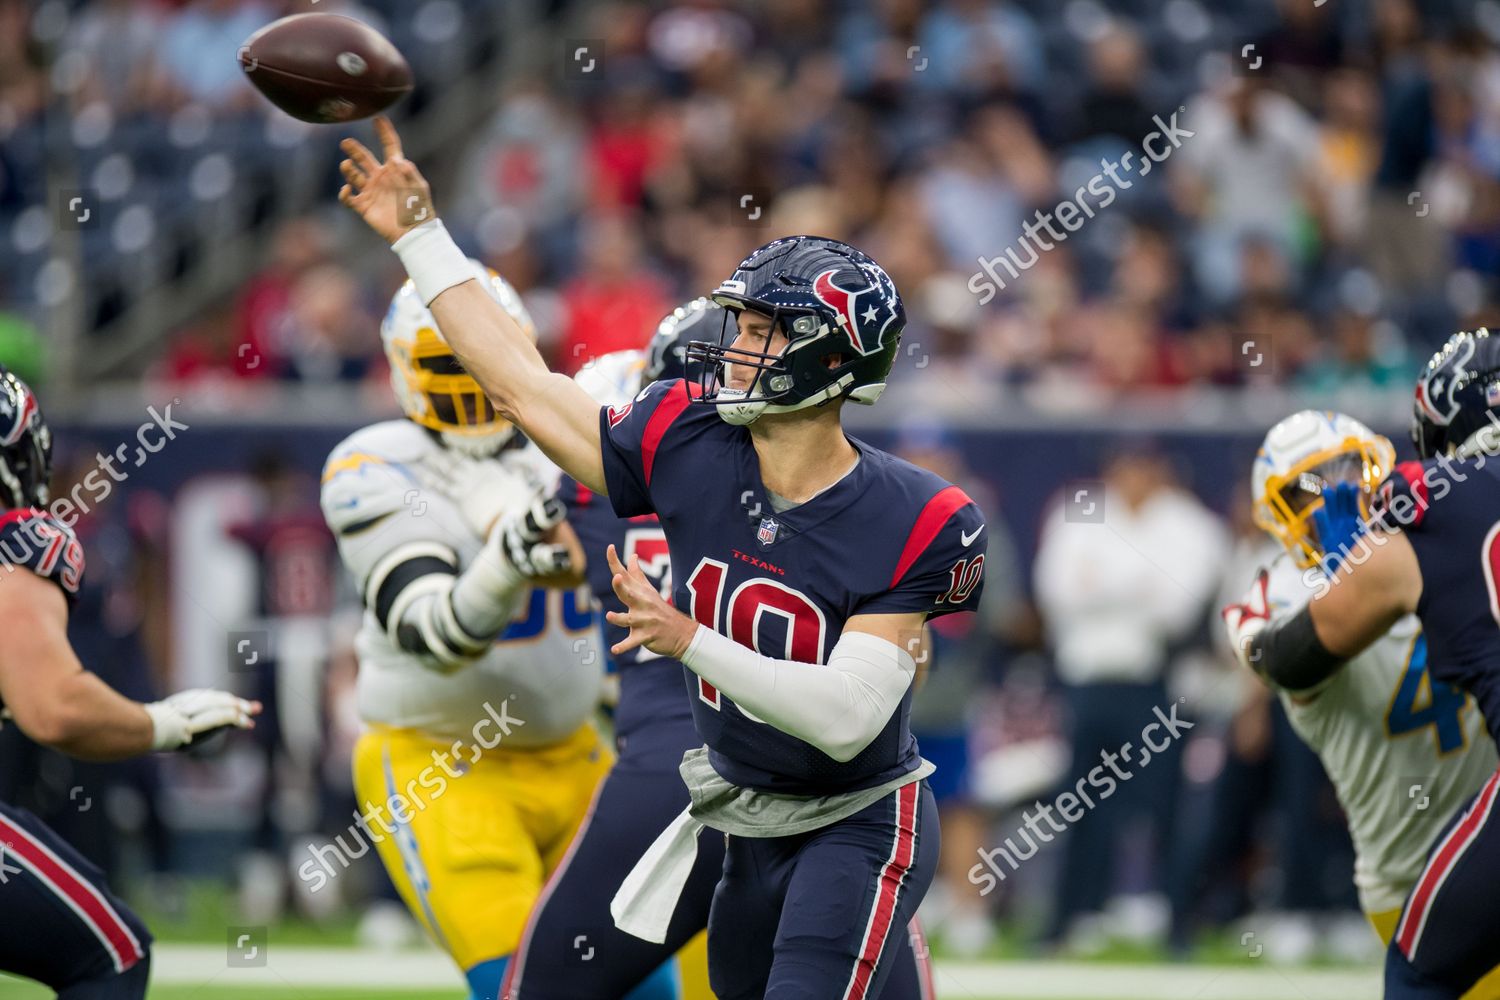 Los Angeles Chargers at Houston Texans on December 26, 2021